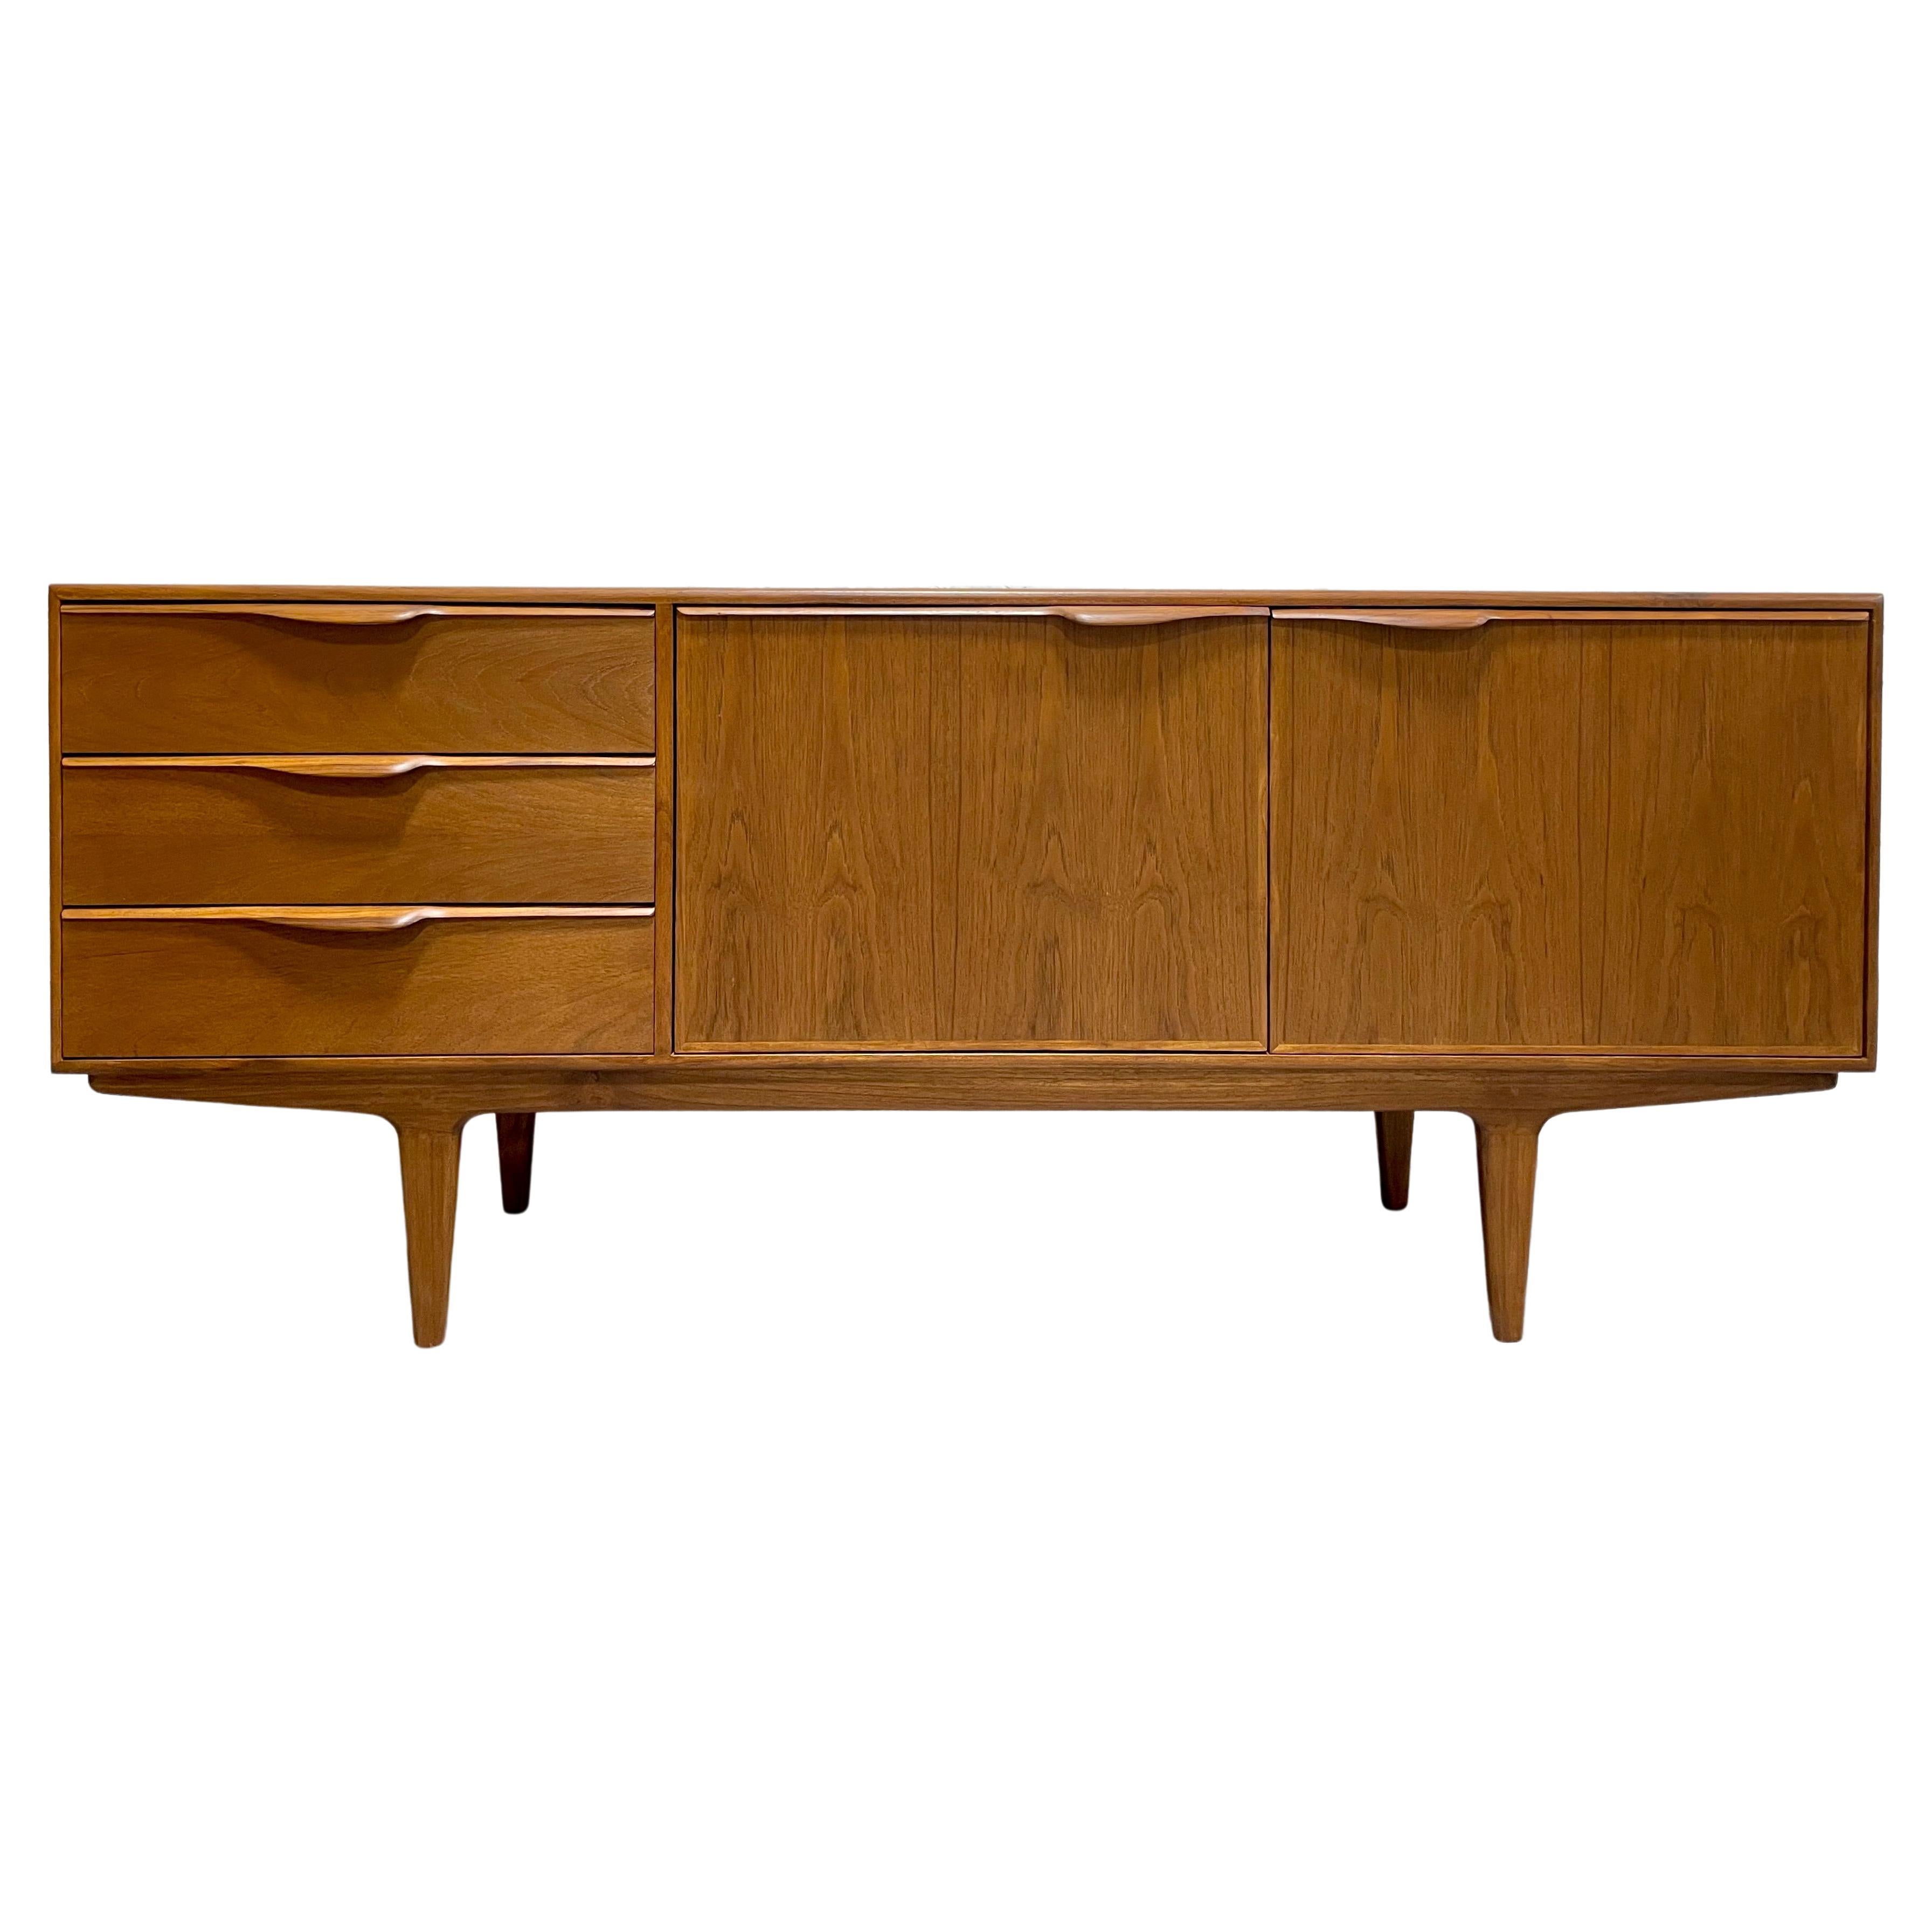 FUNKY + Sculptural Mid Century MODERN style CREDENZA / Media Stand / Sideboard